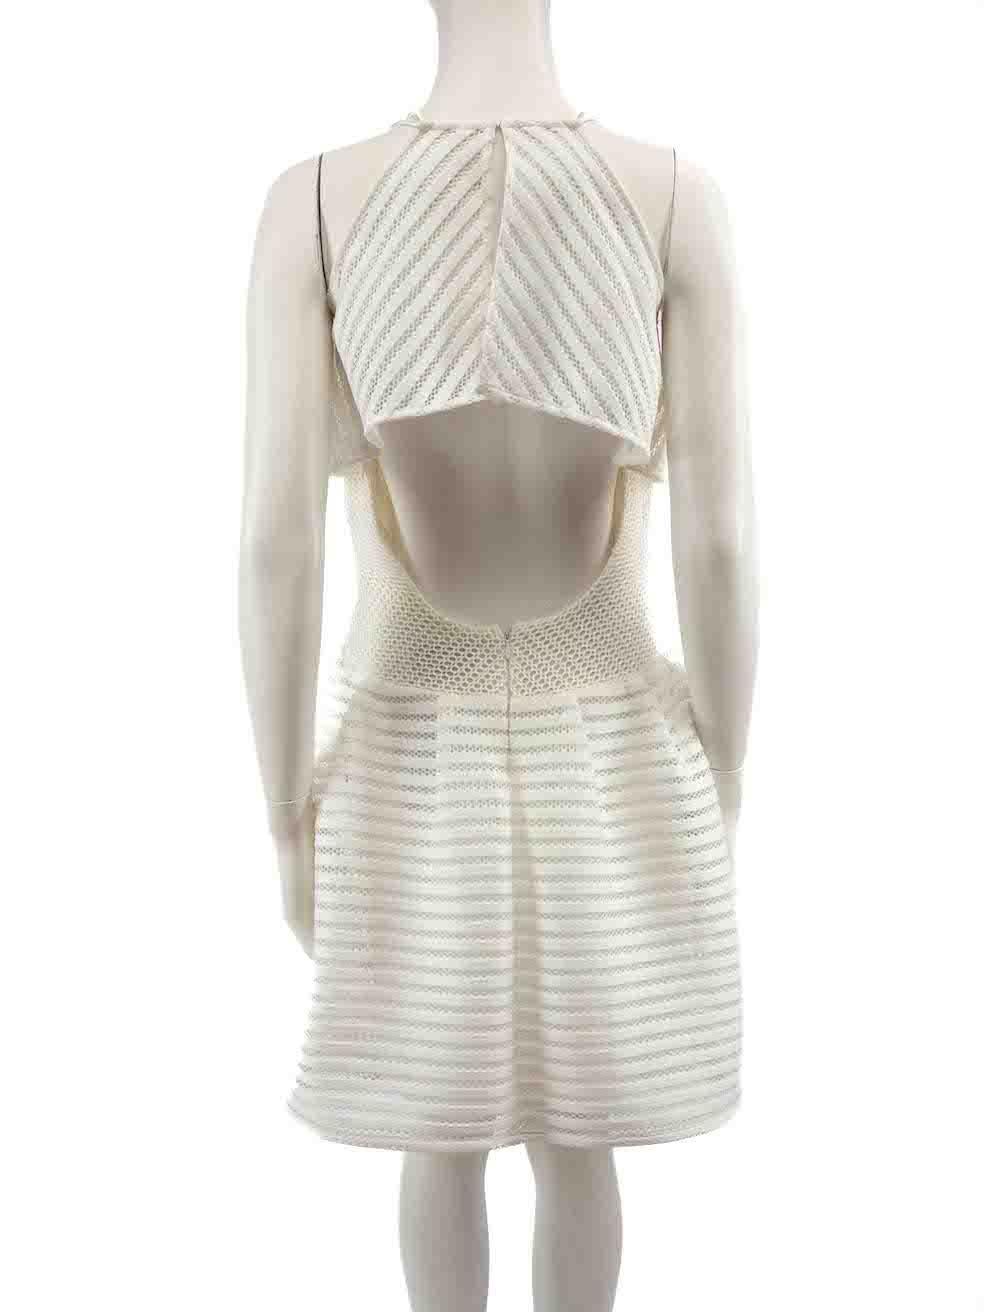 CONDITION is Very good. Minimal wear to dress is evident. Minimal wear to straps with minor discolouration on this used Self-portrait designer resale item.
 
 
 
 Details
 
 
 White
 
 Polyester
 
 Dress
 
 See through mesh striped
 
 Knee length
 
